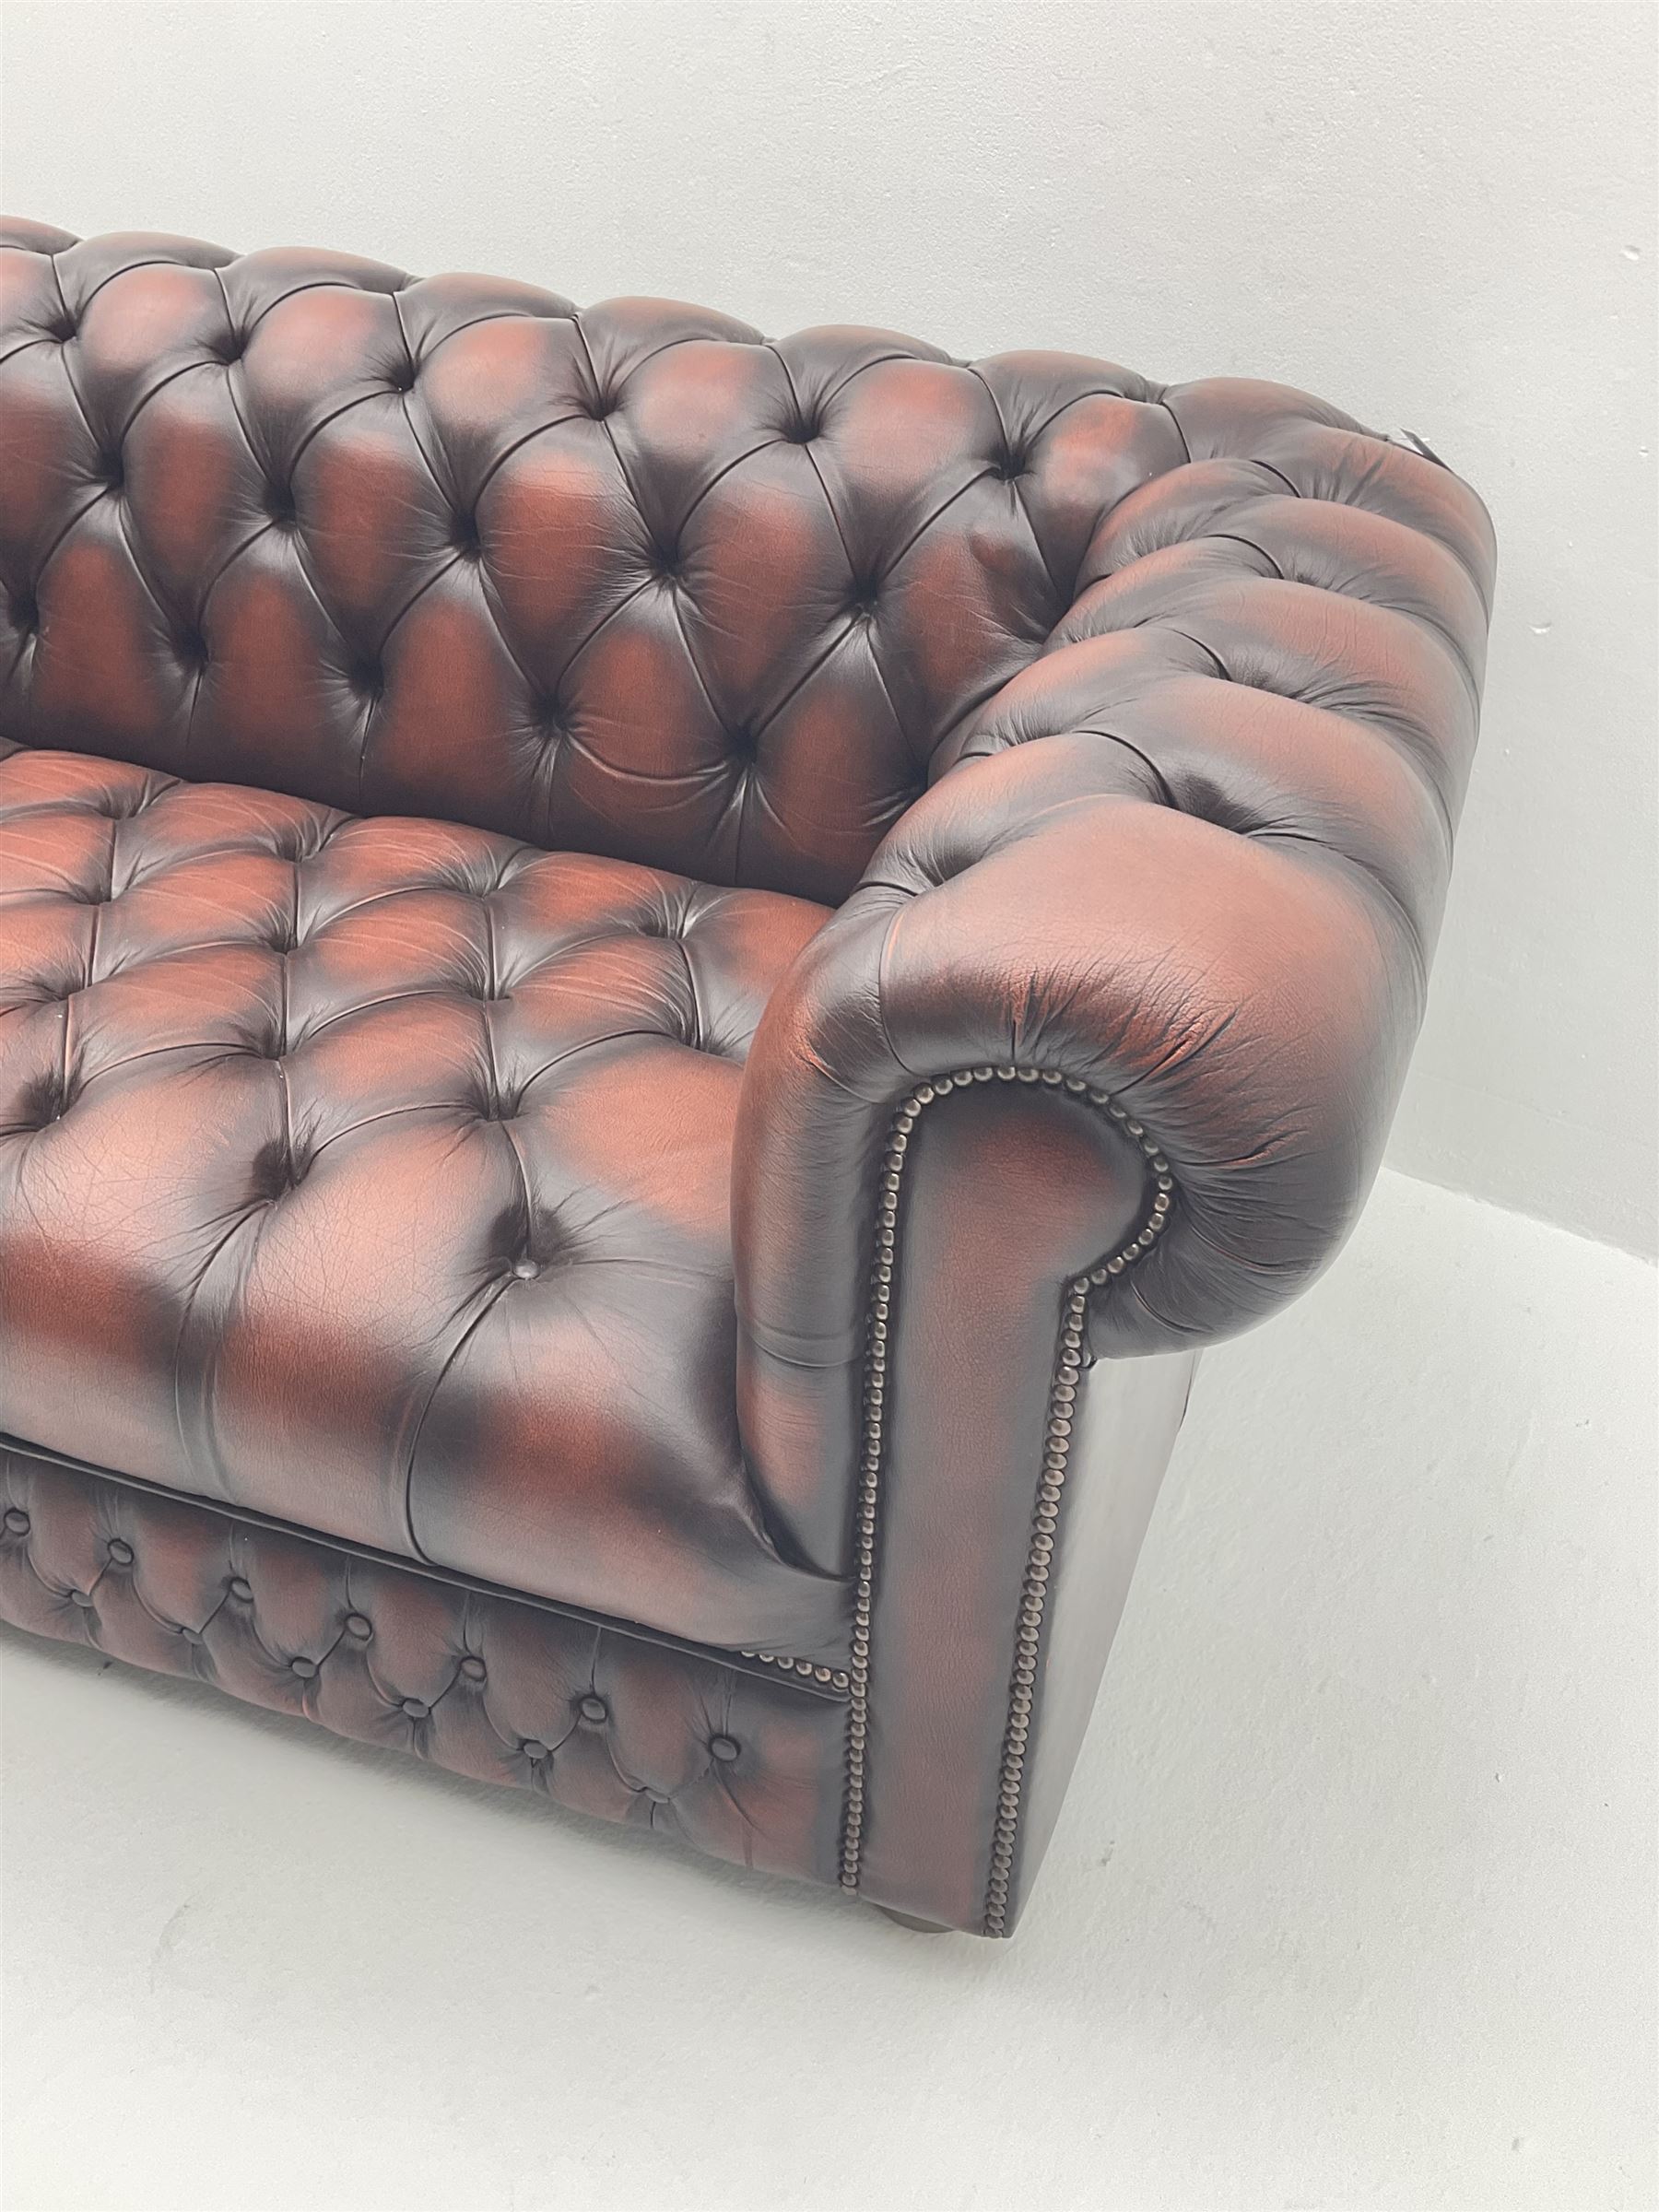 Large four seat Chesterfield sofa upholstered in buttoned brown leather - Image 2 of 4